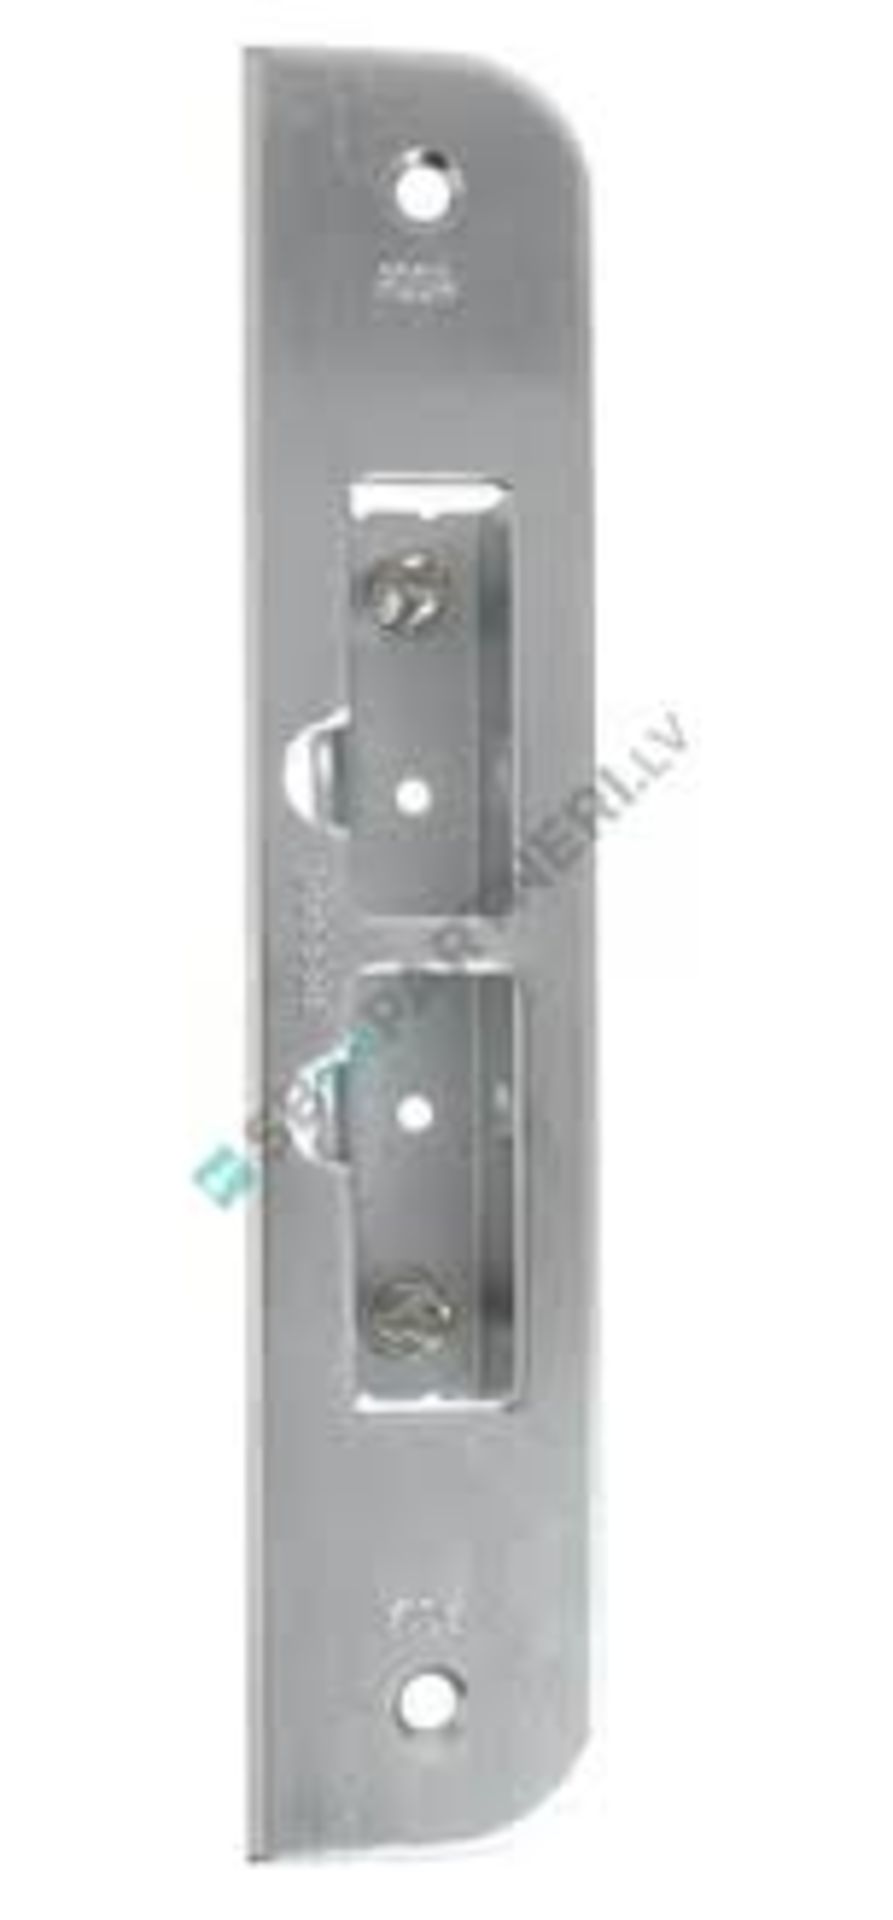 15 x Assa Abloy Security Striking Plate - New Stock (see below) - Product Code: 1887-2 - CL538 -